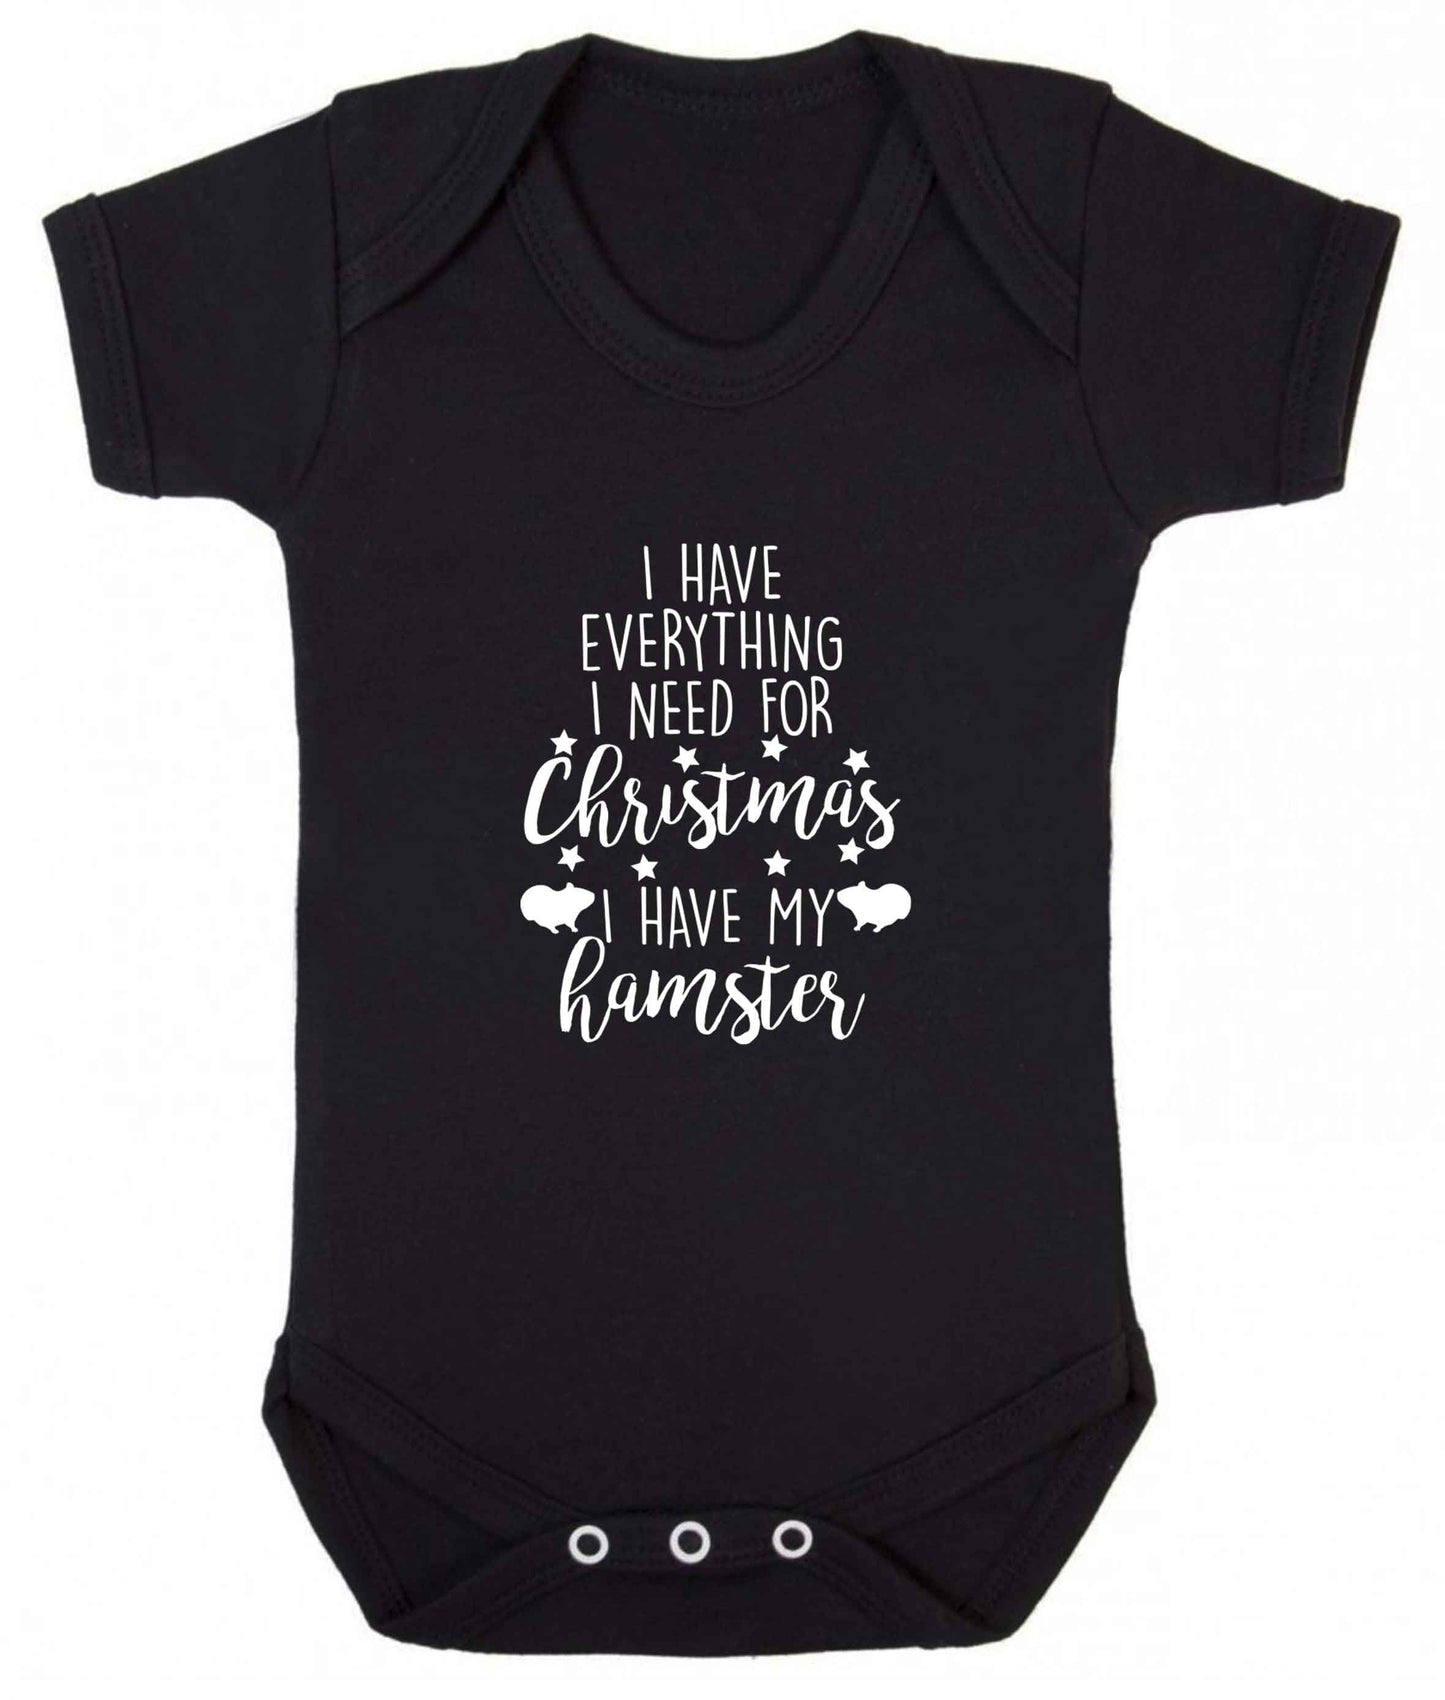 I have everything I need for Christmas I have my hamster baby vest black 18-24 months